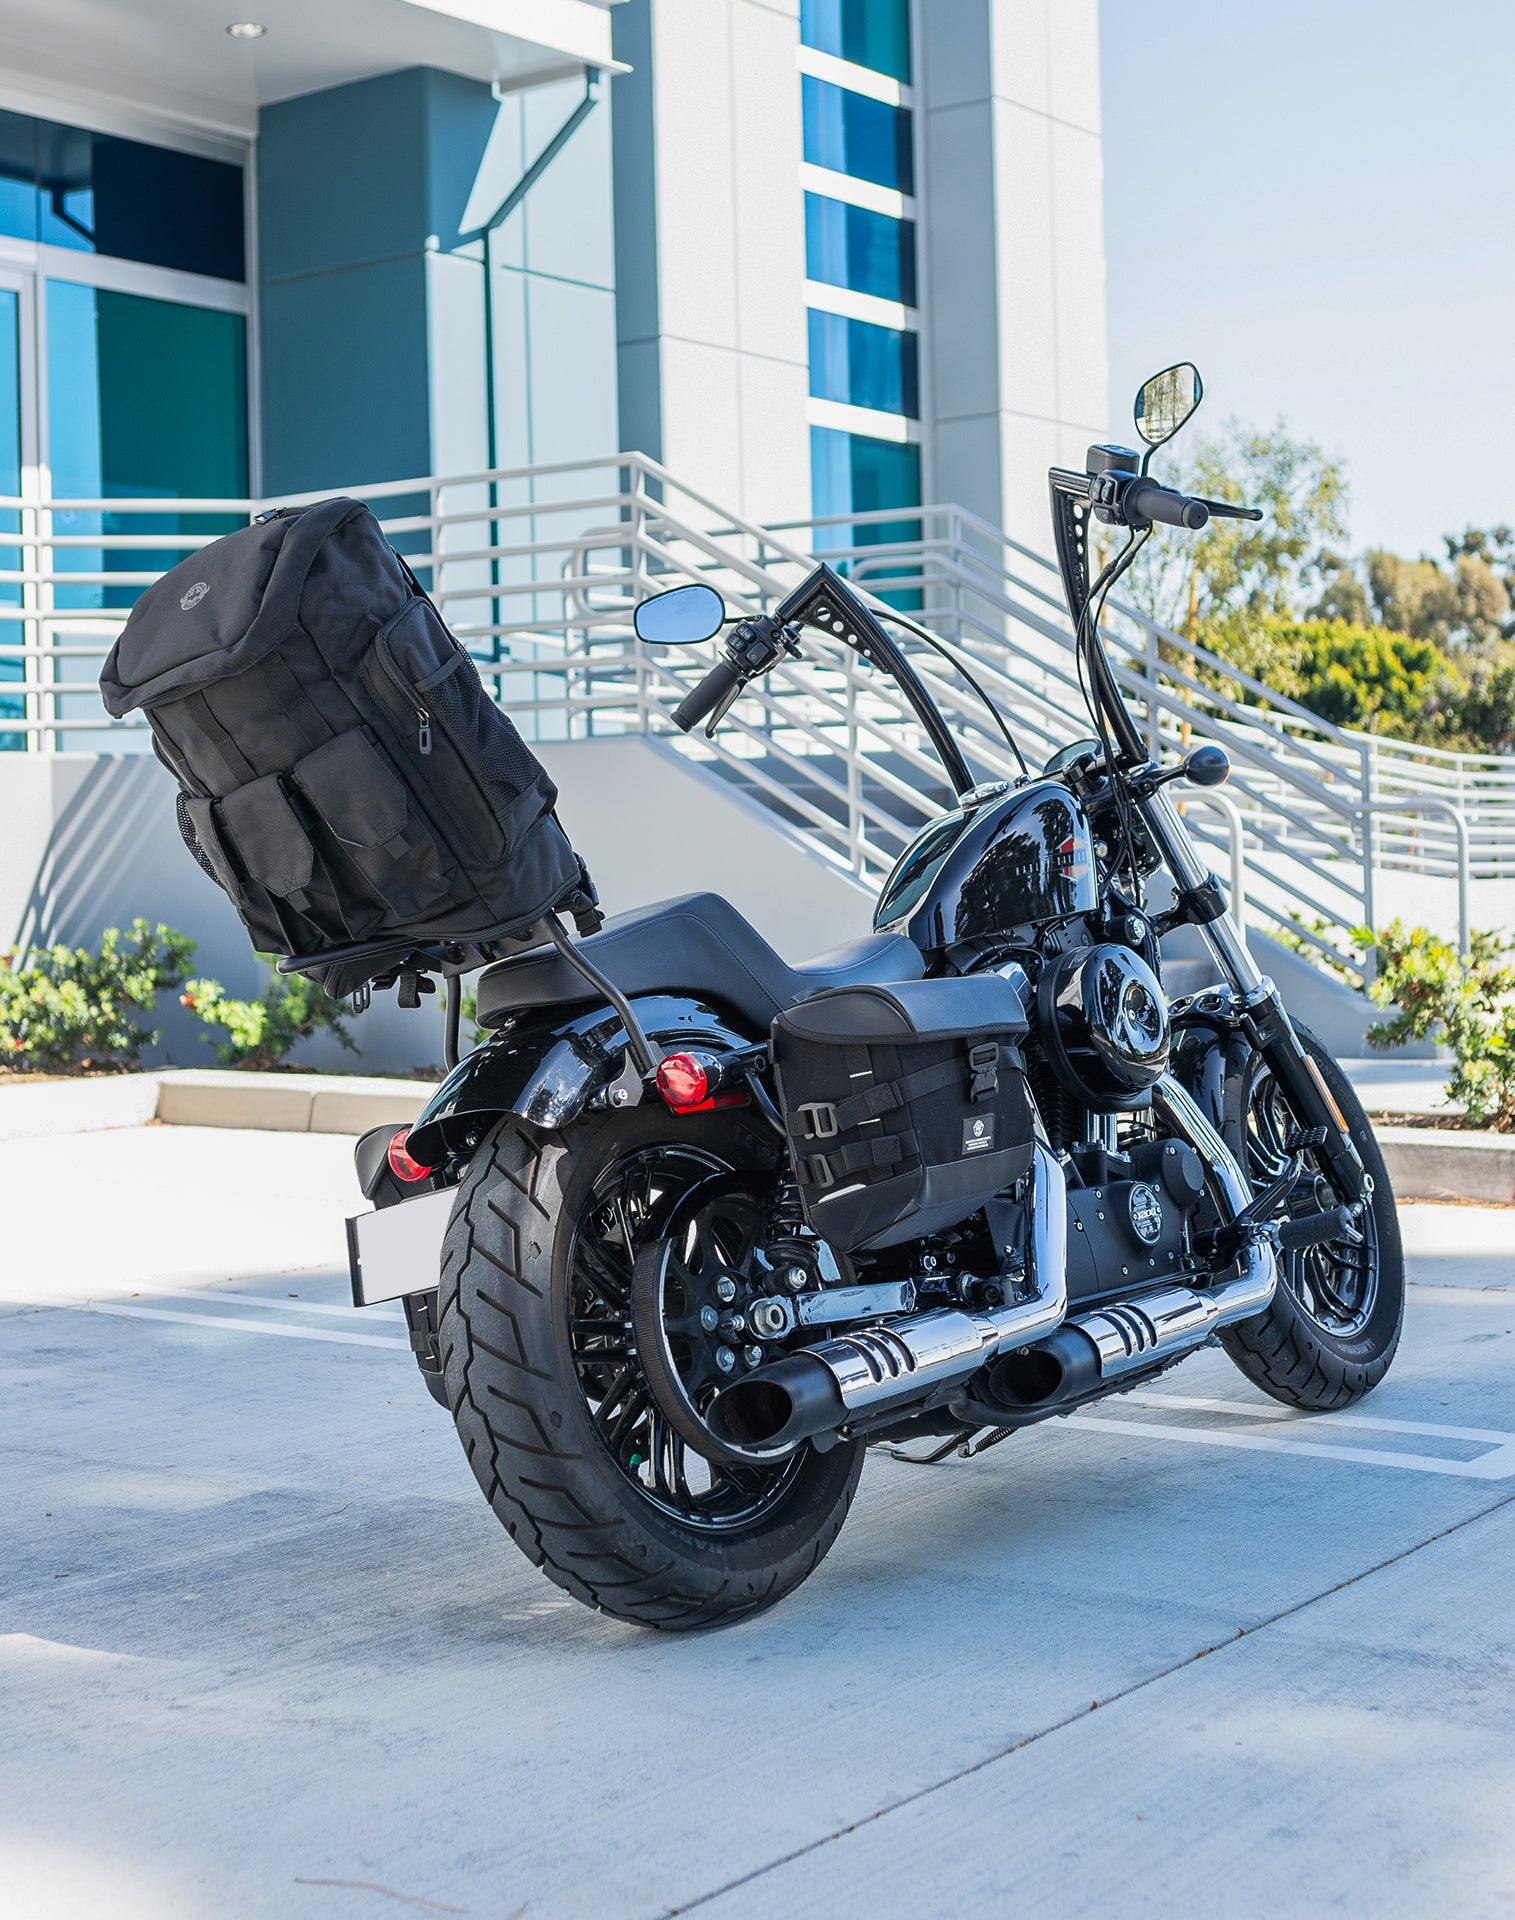 32L - Trident Large Suzuki Motorcycle Backpack